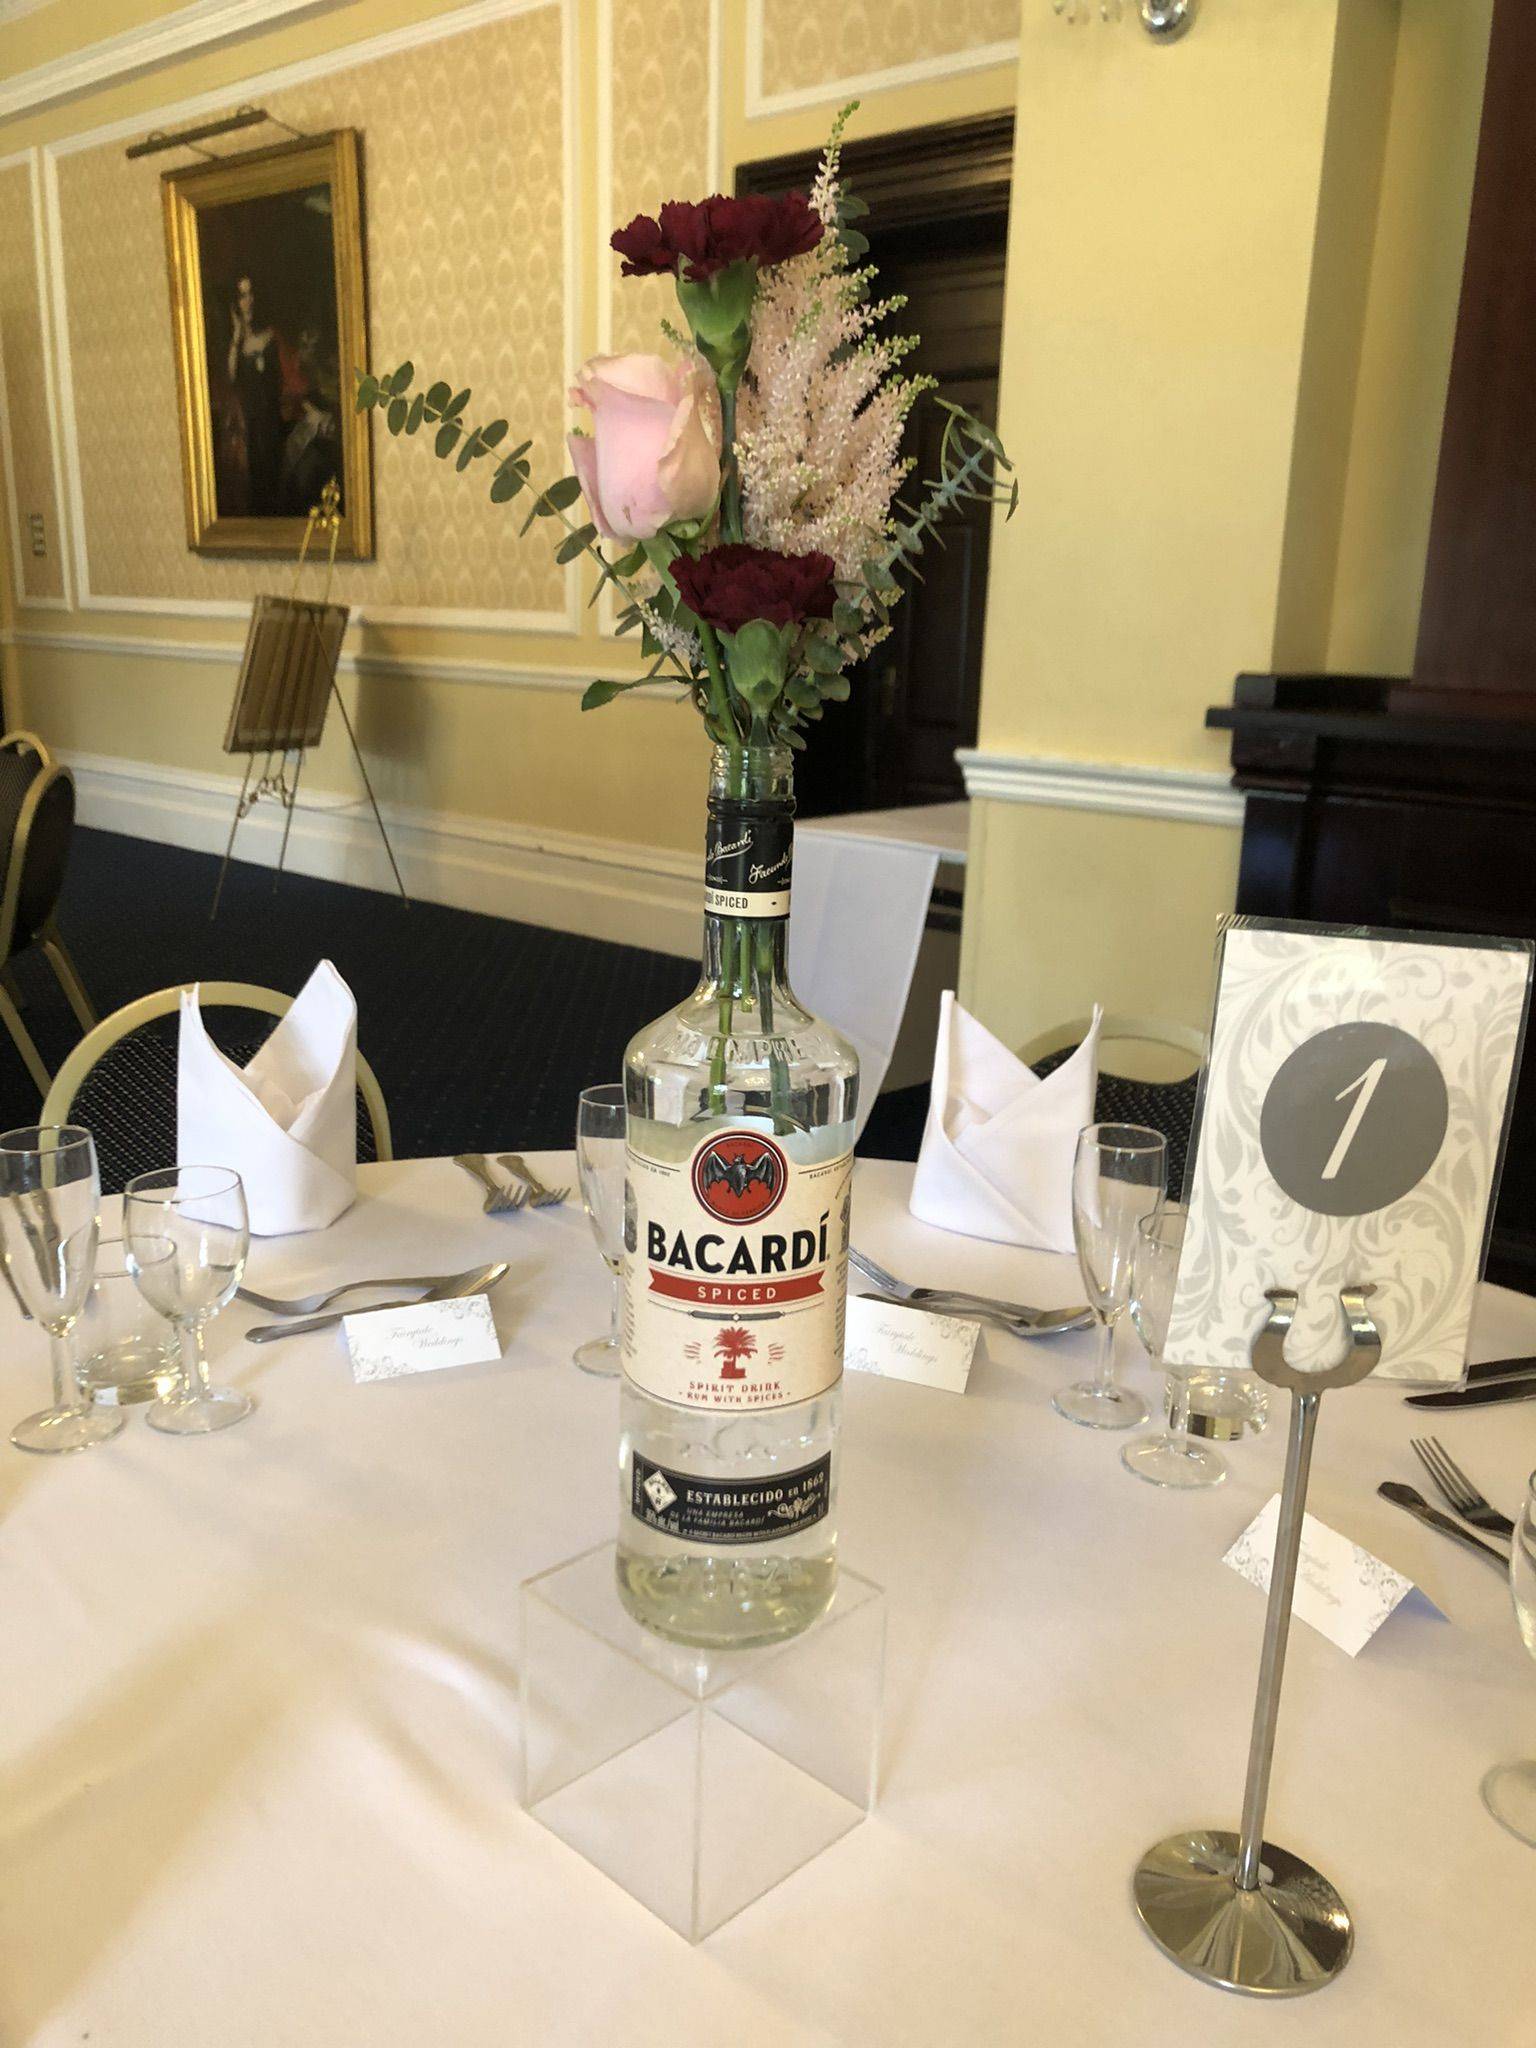 a bottle of bacardi sitting on a table.